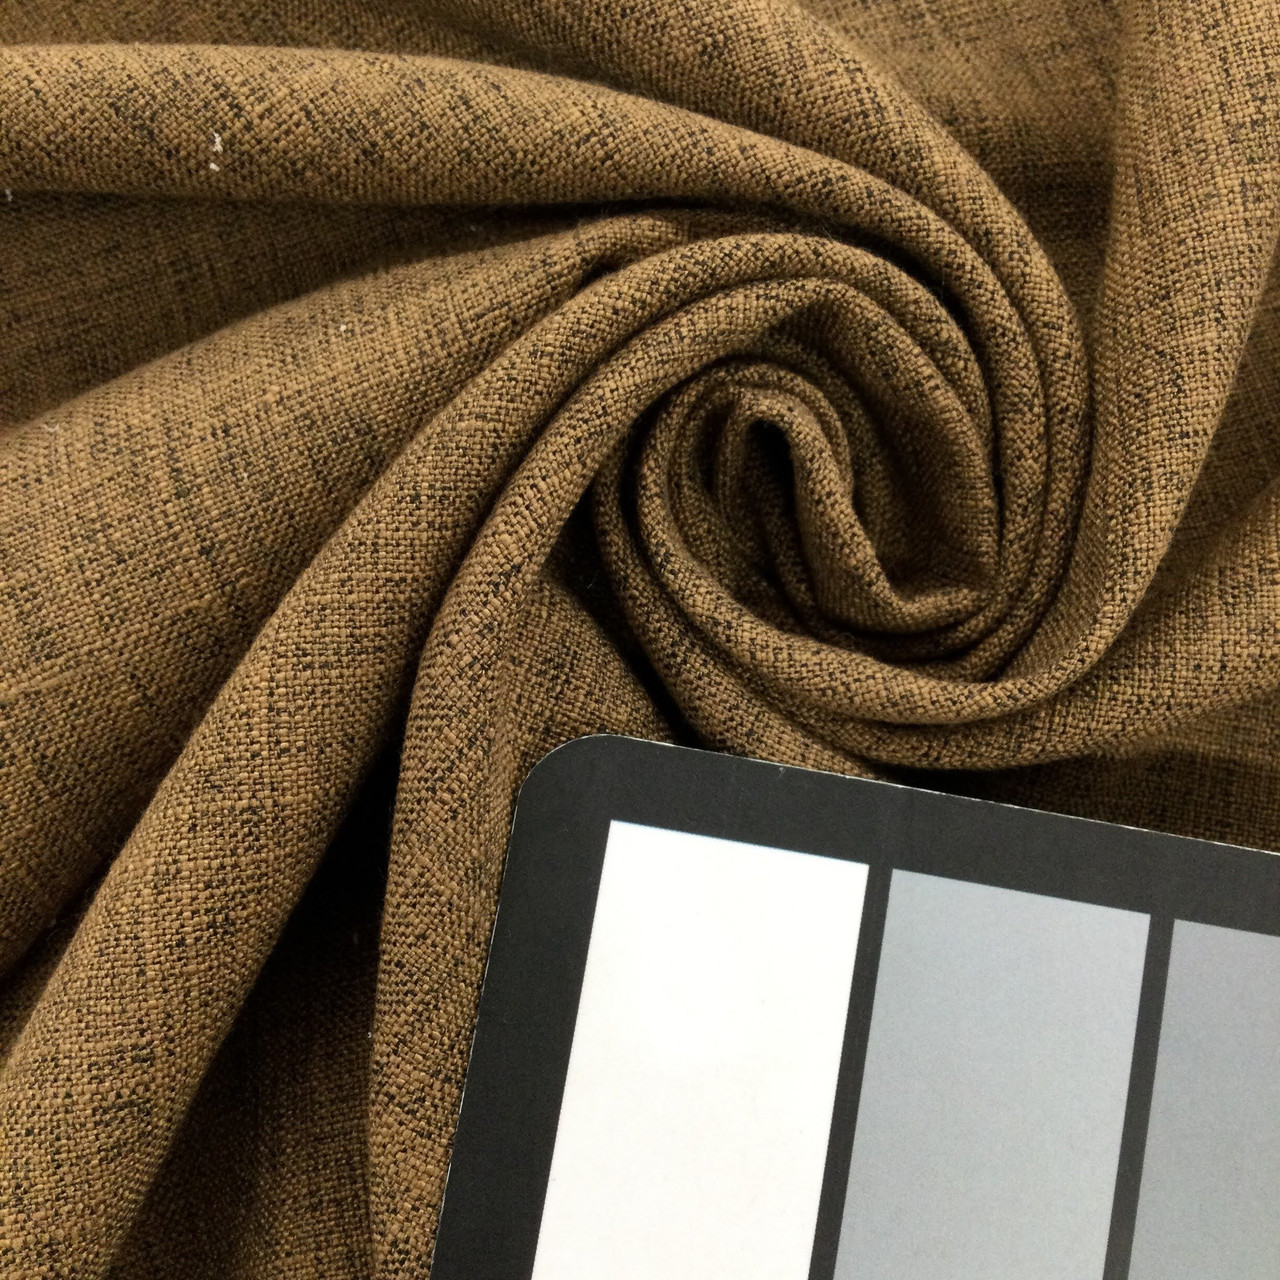 Heathered Brown Linen Weave Fabric, Upholstery / Drapery